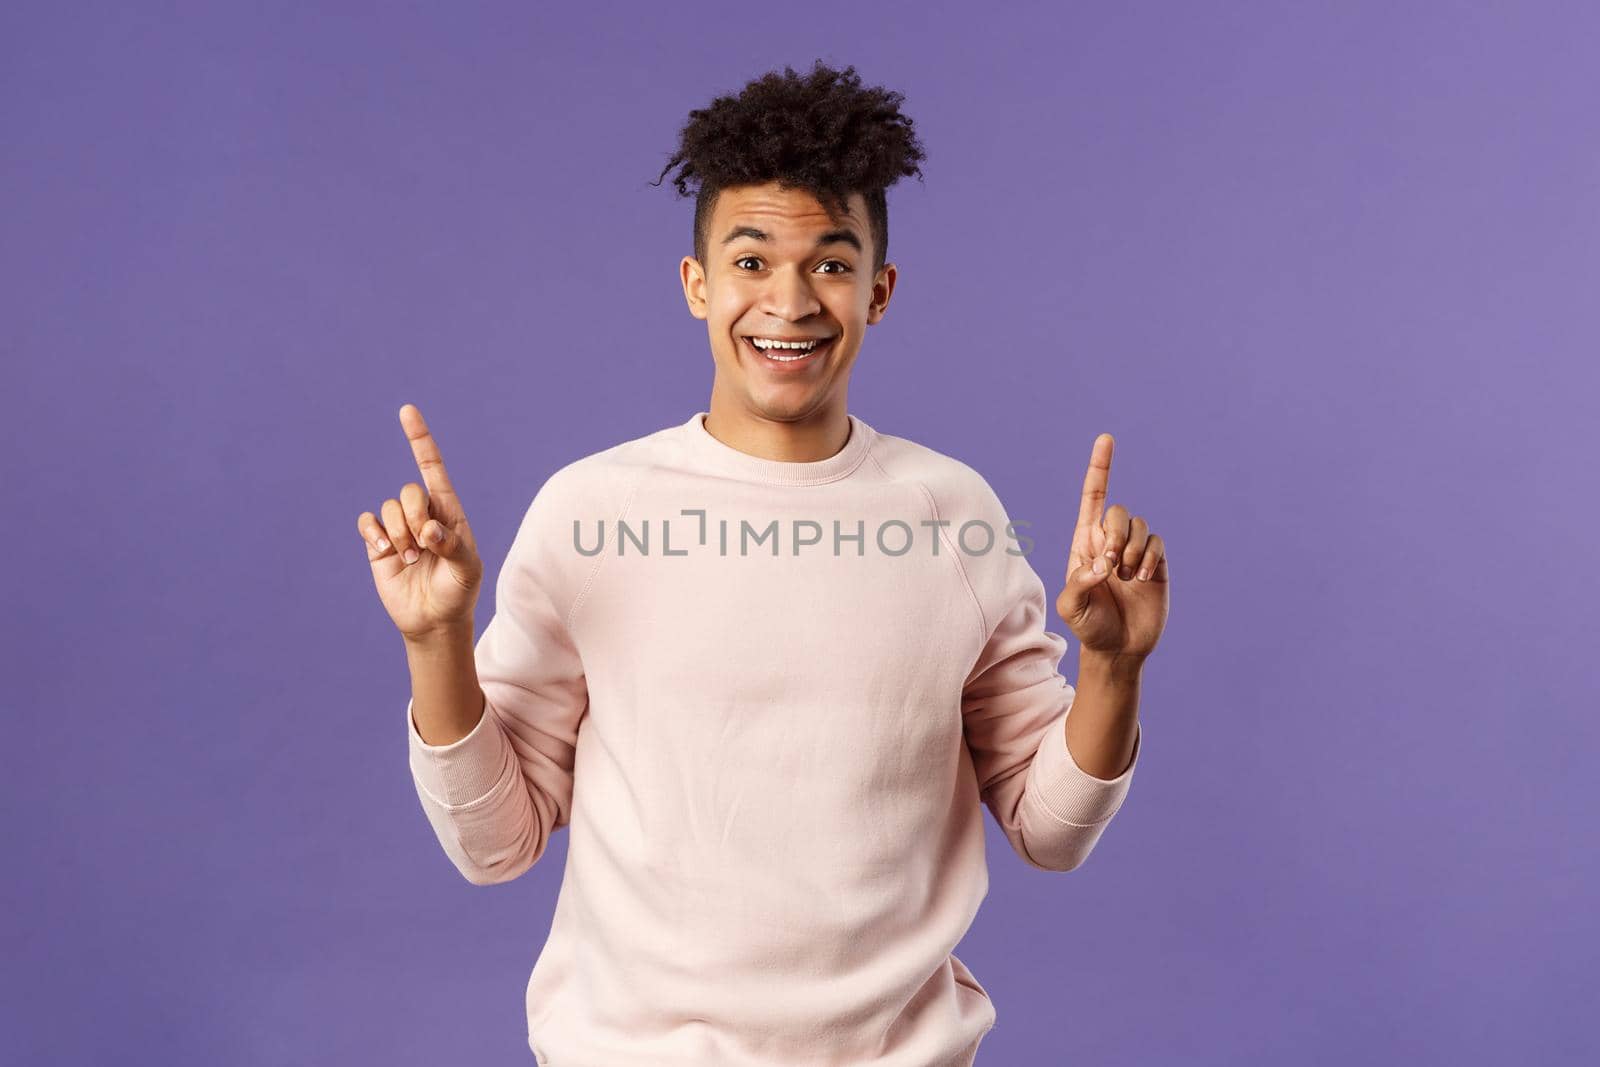 Portrait of charismatic lively young man heard about good deal, asking question intrigued, pointing fingers up, smiling upbeat at camera, look with interest, recommend product, purple background.